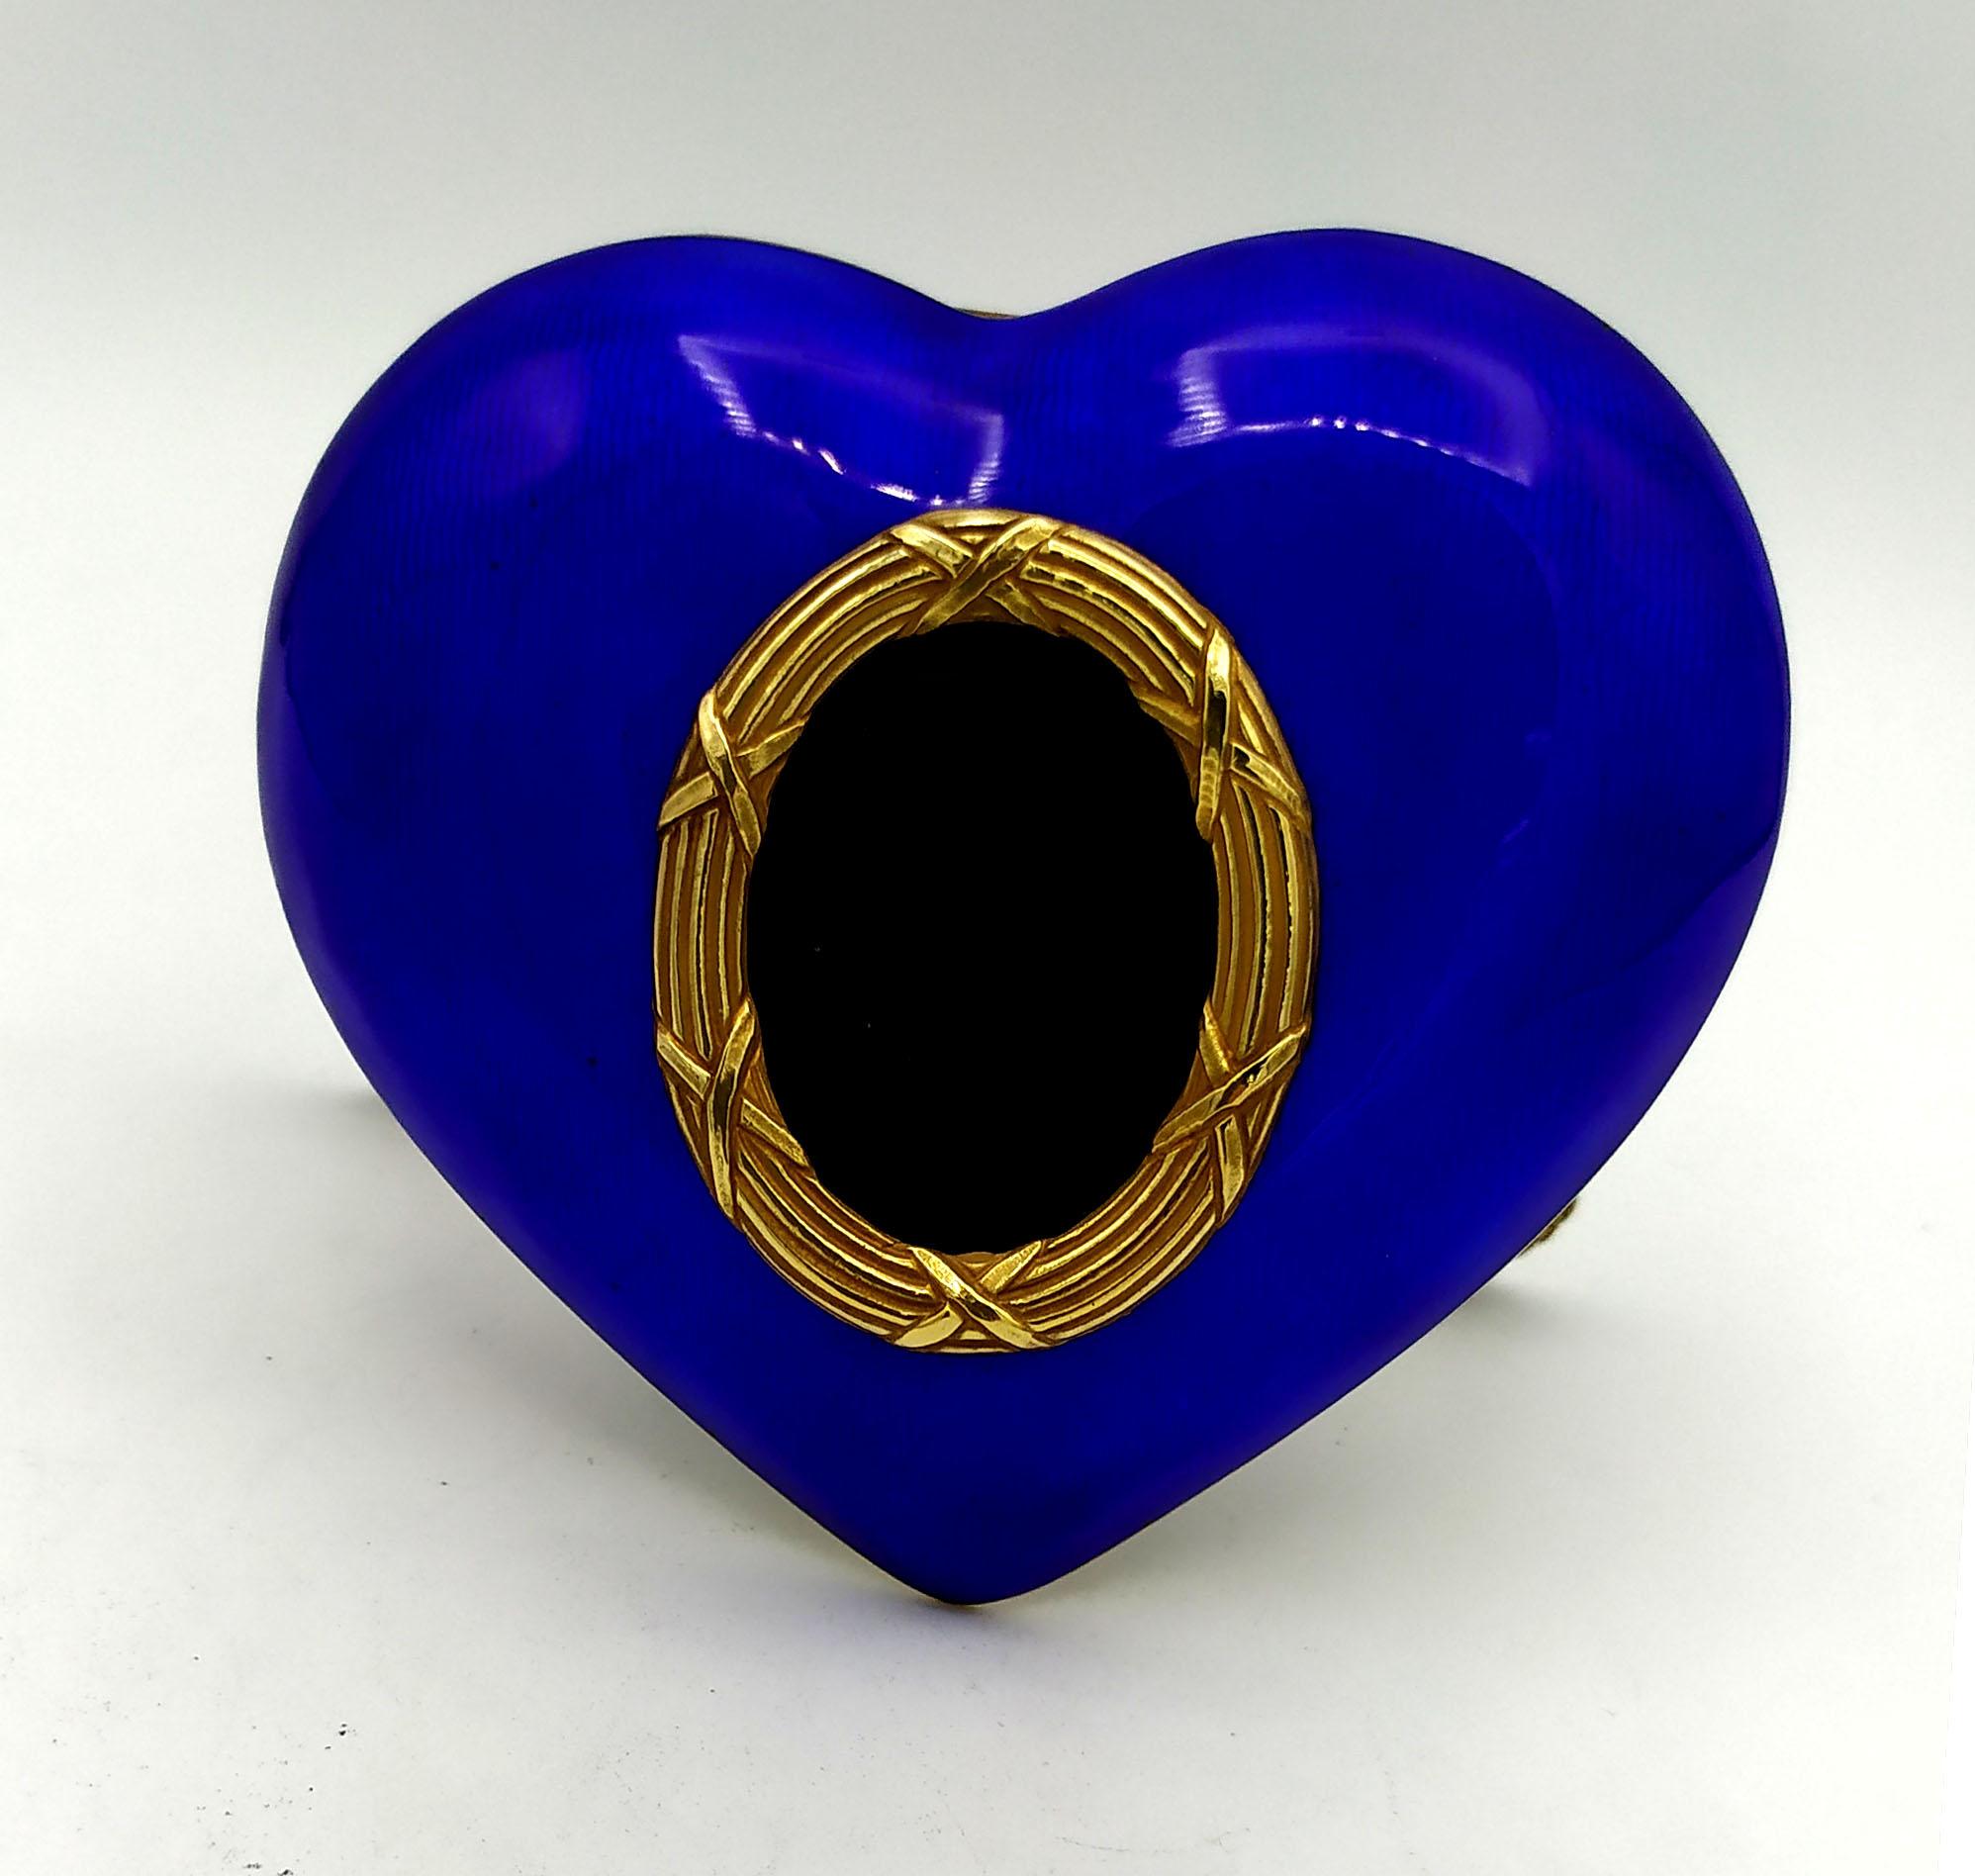 Heart-shaped rounded frame with oval photo in 925/1000 sterling silver gold plated with translucent fired enamel on guillochè. With hinged silver-gilt foot engraved in Empire style. External dimensions cm. 8.8 x 9.7 internal oval cm. 2.7 x 3.6.